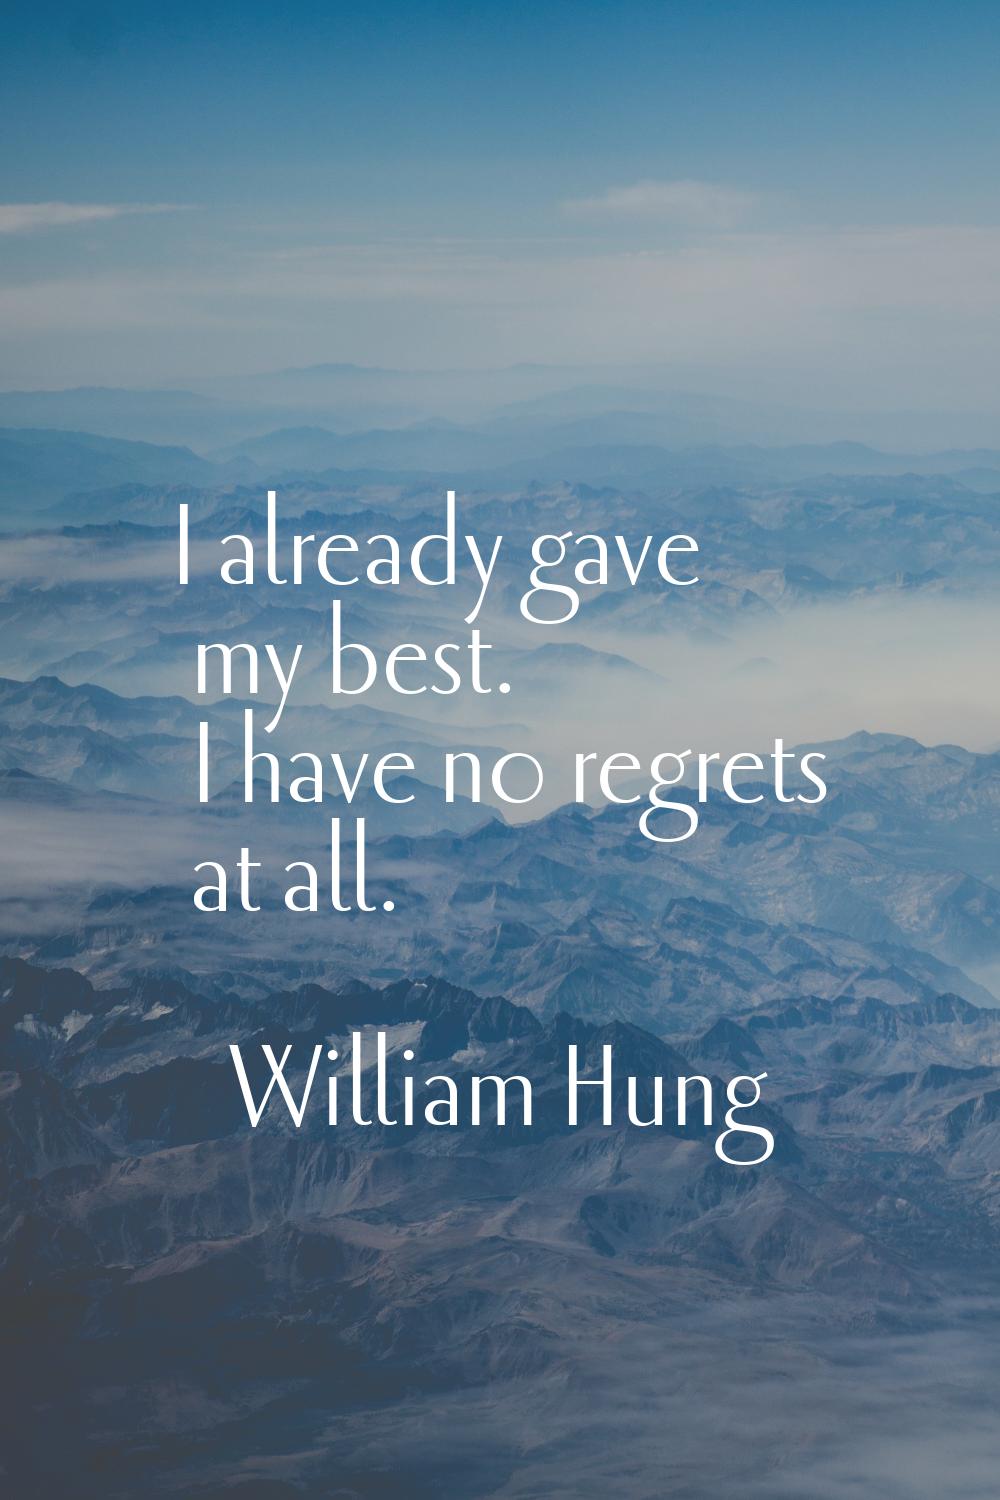 I already gave my best. I have no regrets at all.